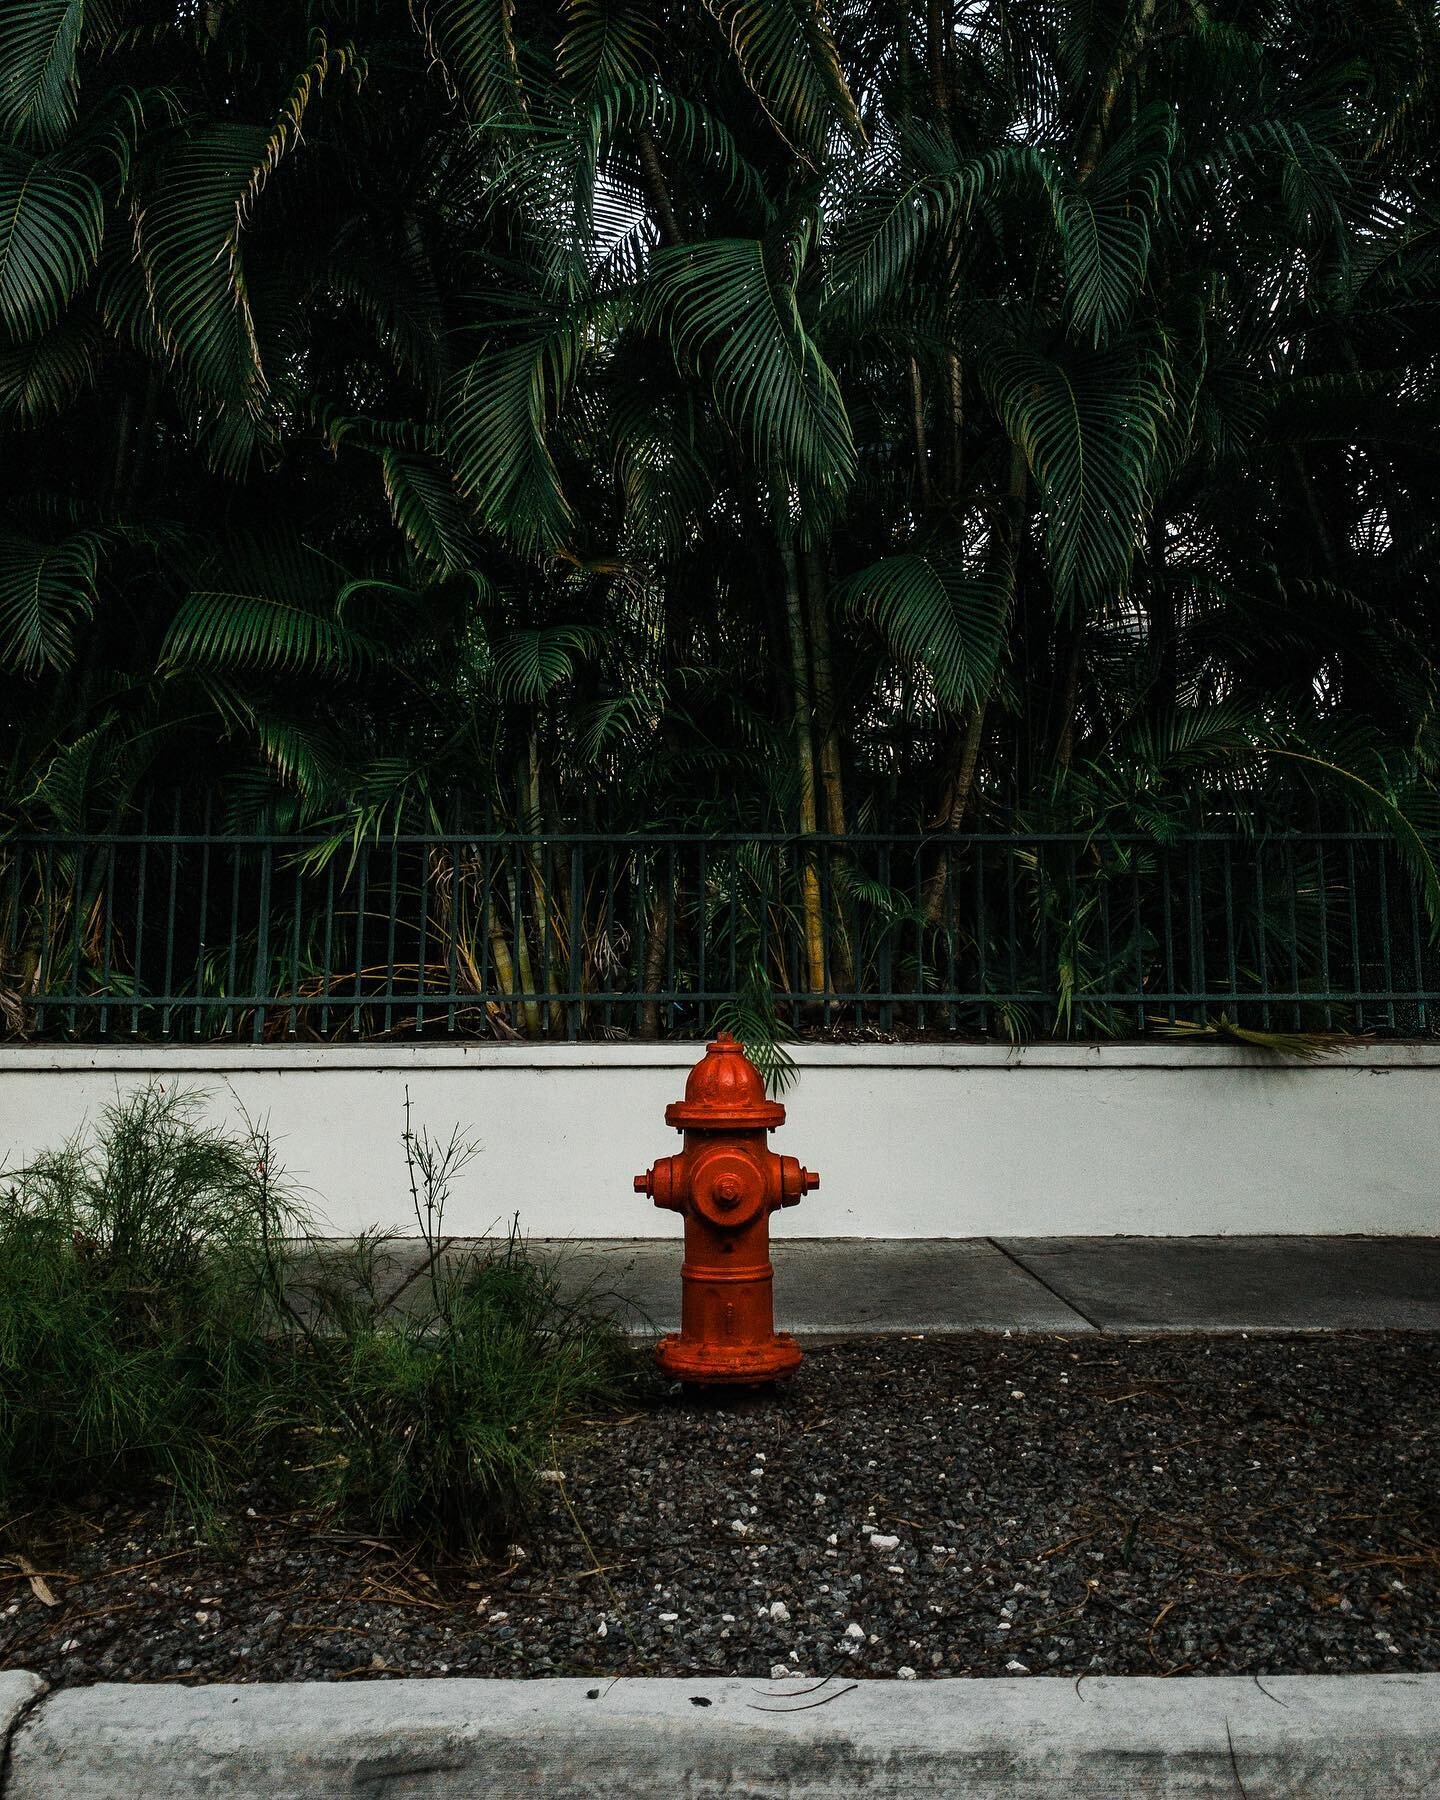 How is it that even the fire hydrants look beautiful in the Keys?